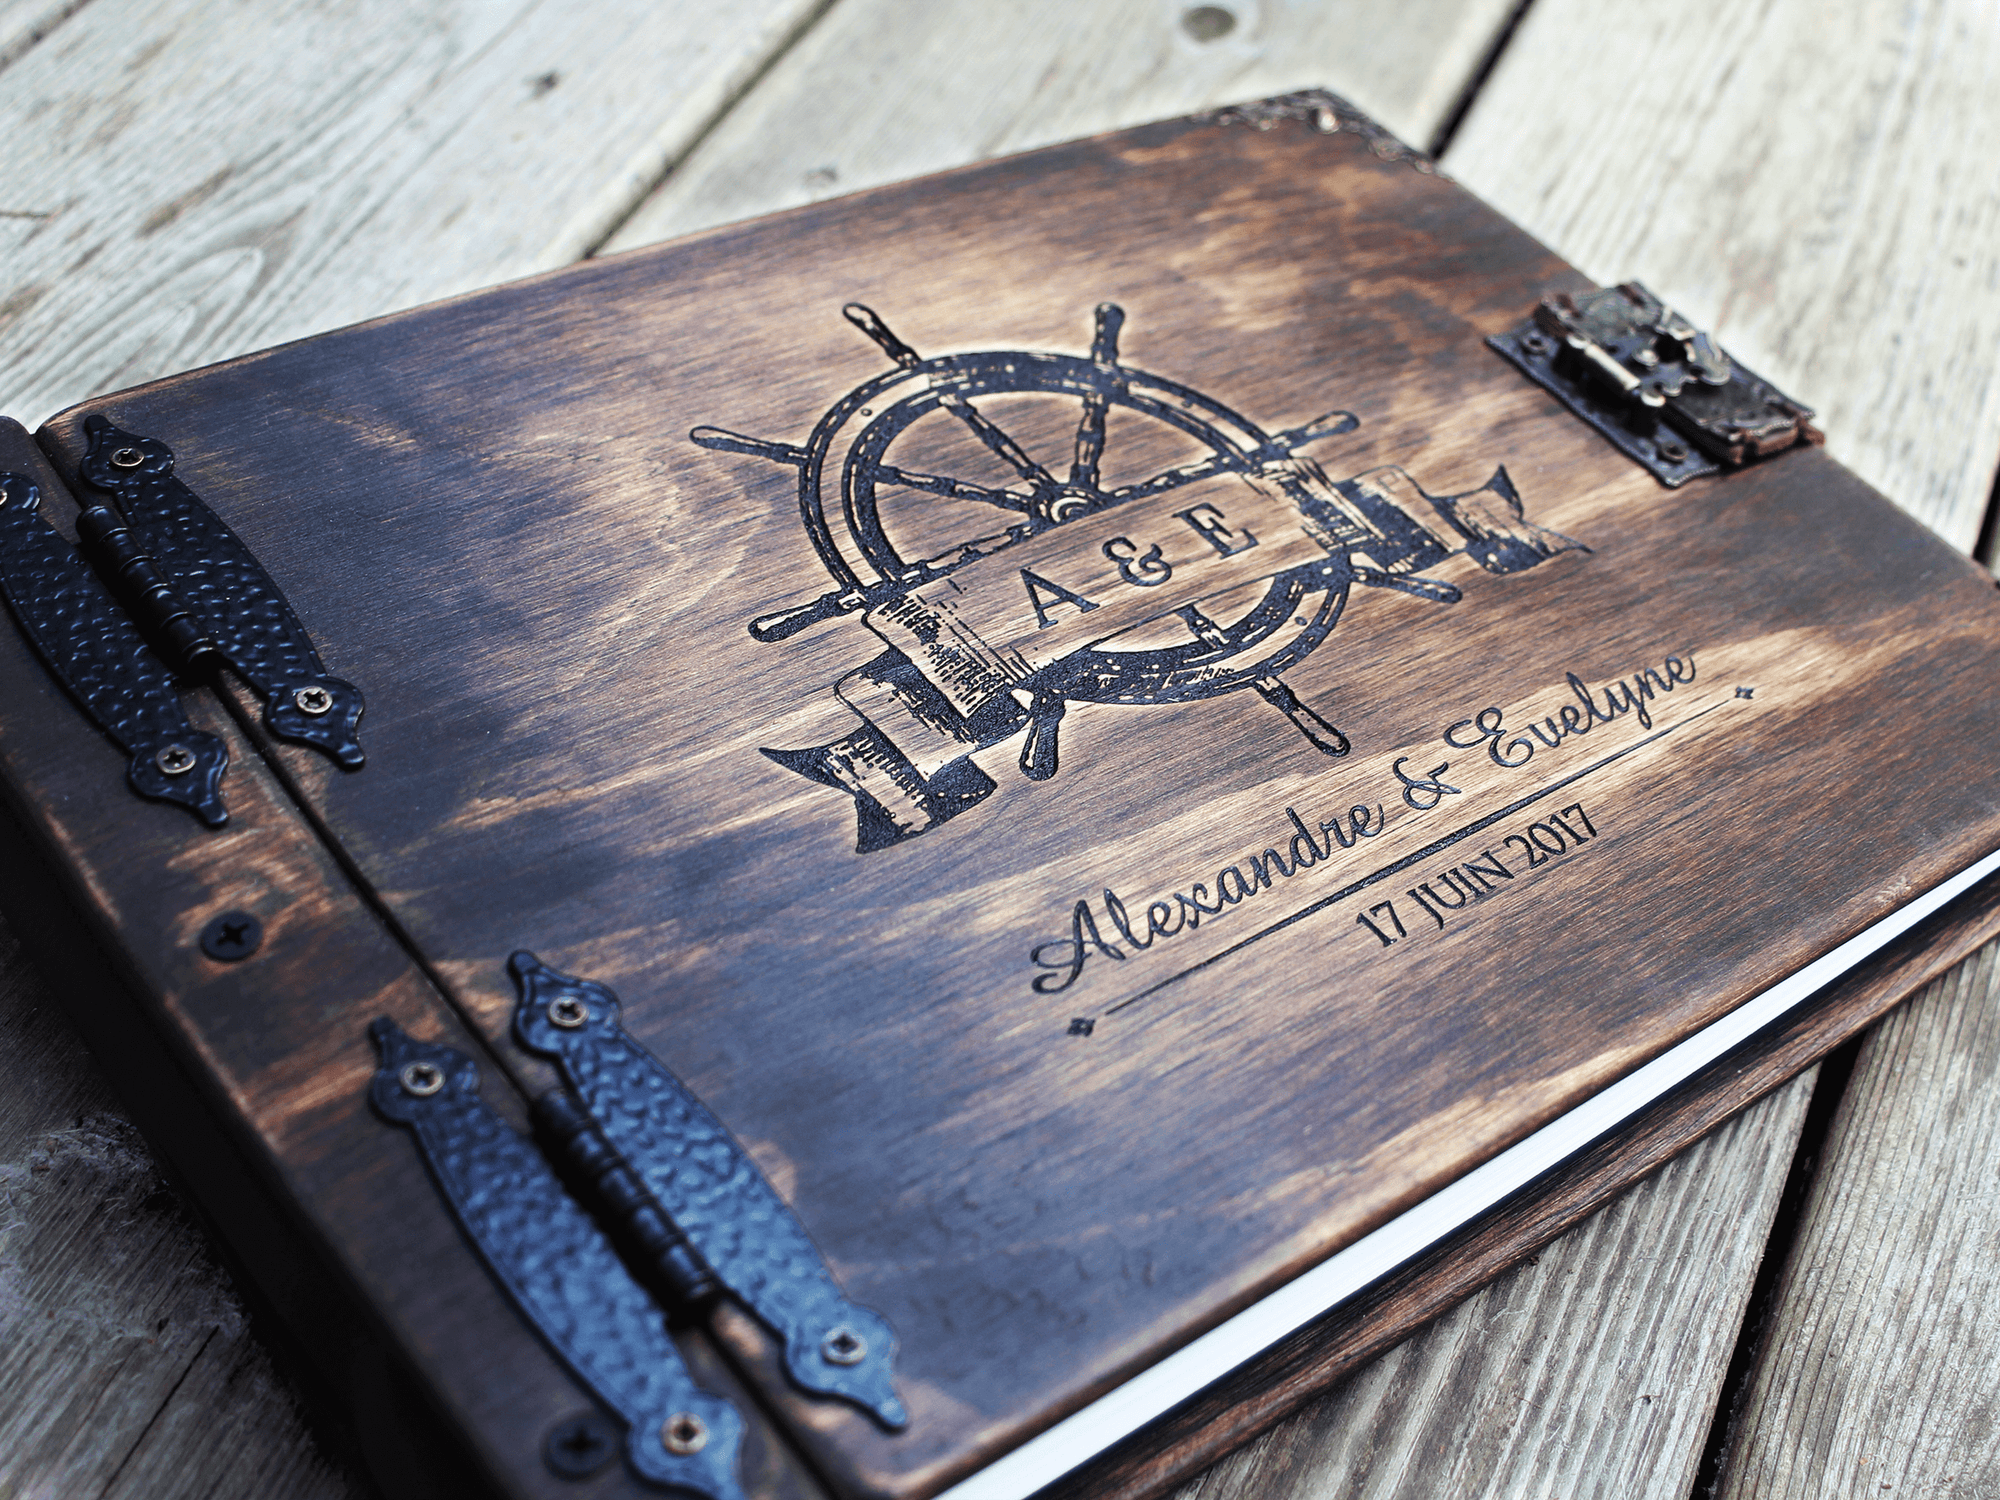 Family Vacation Photo Book | Keep your family vacation memories alive in a personalized photo book by Rustic Engravings - the perfect way to cherish your time together.